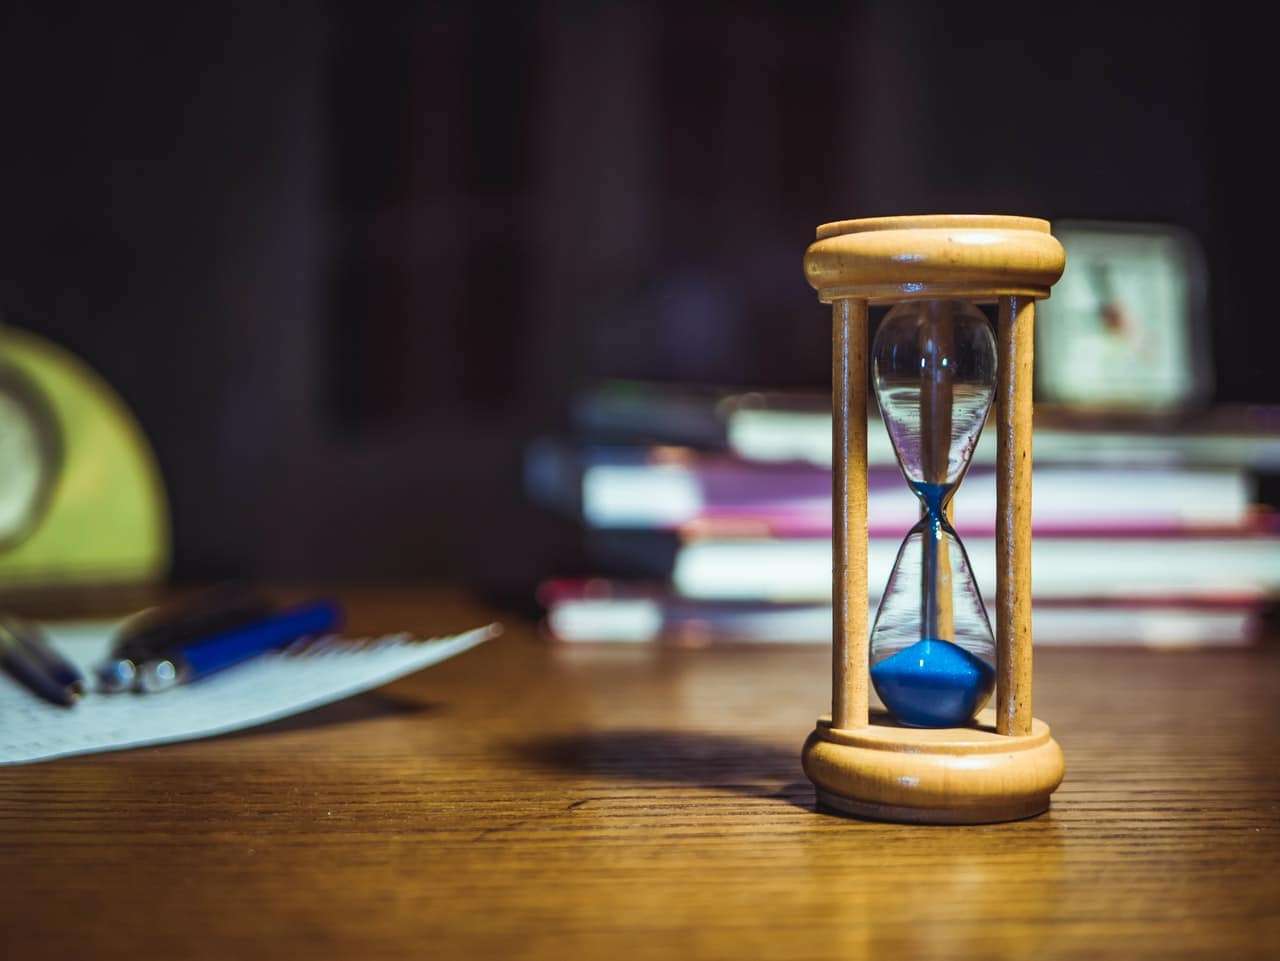 Time management with a hourglass